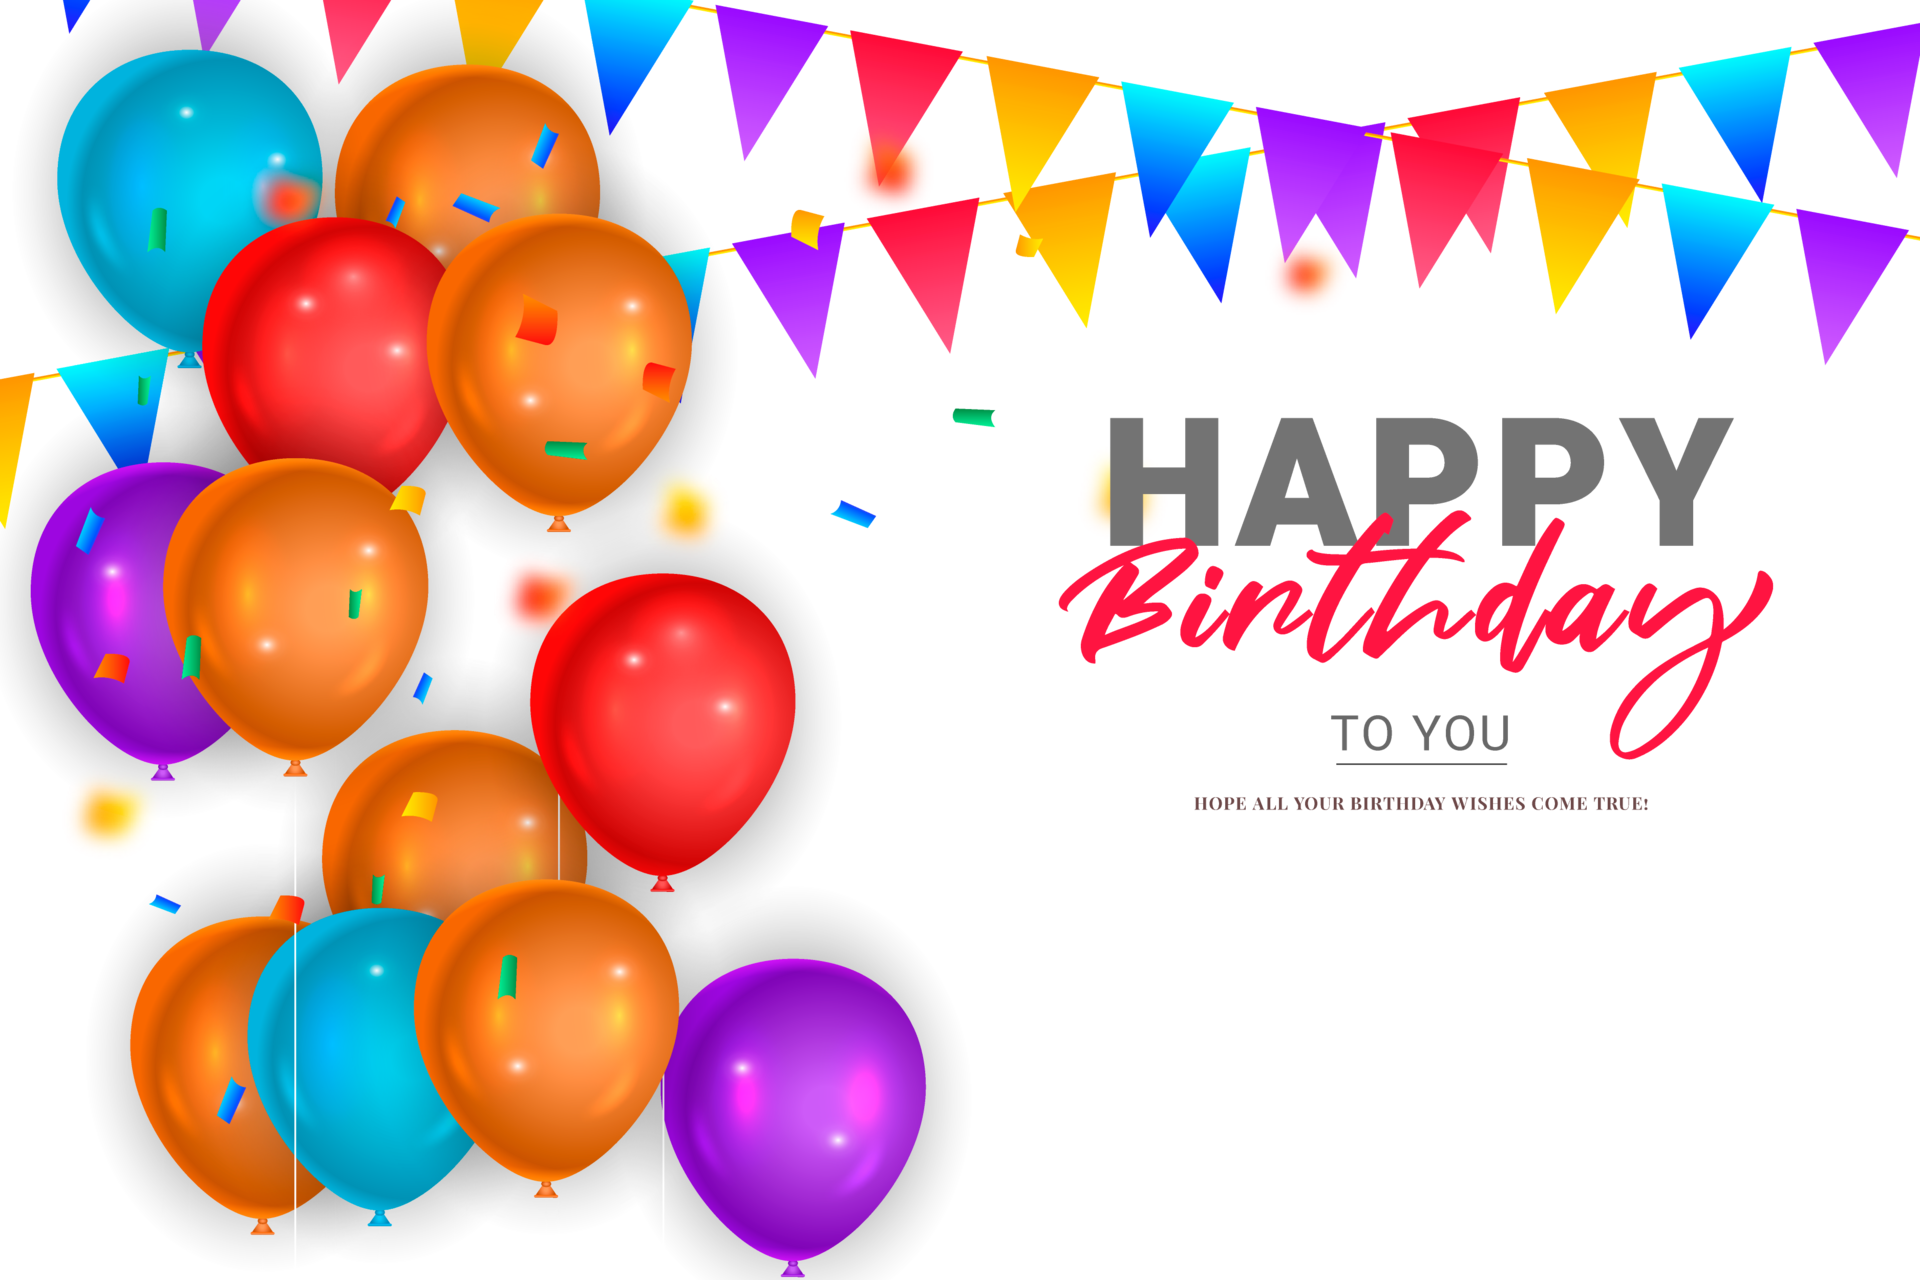 Elegant Golden Ballon Happy Birthday Celebration Card Banner Template  Royalty Free SVG, Cliparts, Vectors, and Stock Illustration. Image  164950922.